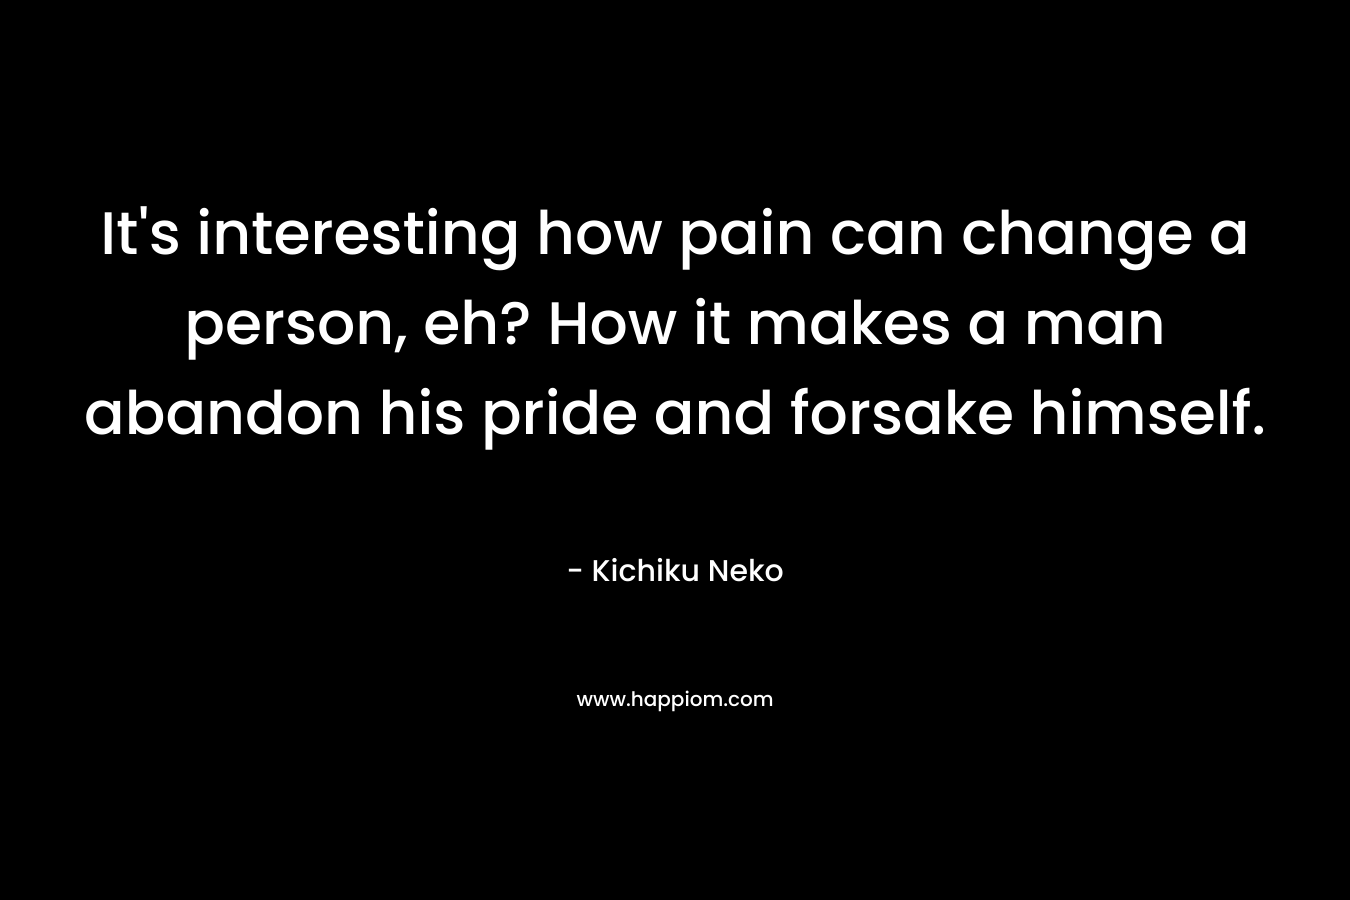 It's interesting how pain can change a person, eh? How it makes a man abandon his pride and forsake himself.